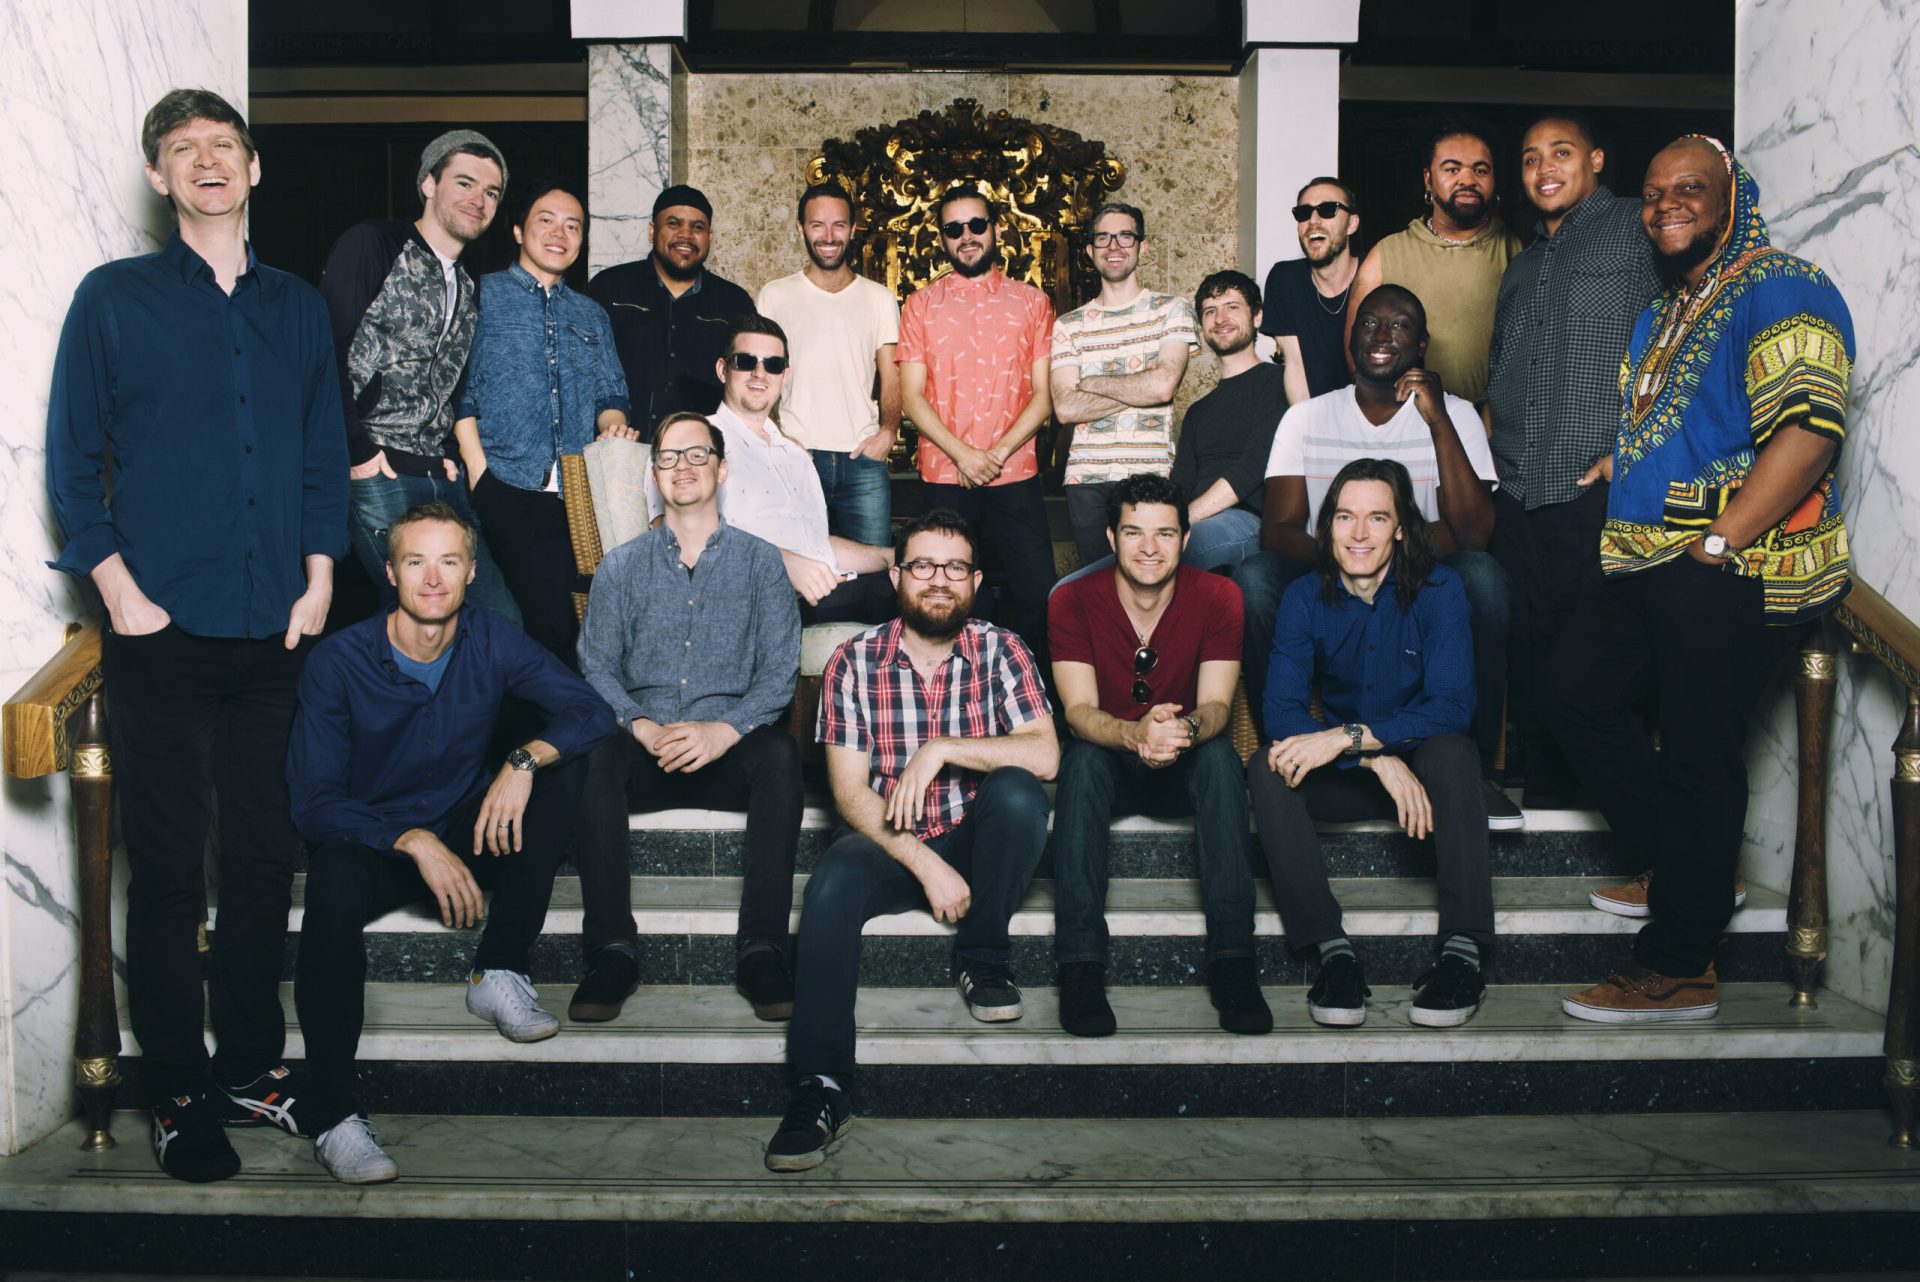 Snarky Puppy closes the 30th edition staging the only three concerts announced by the band in Europe